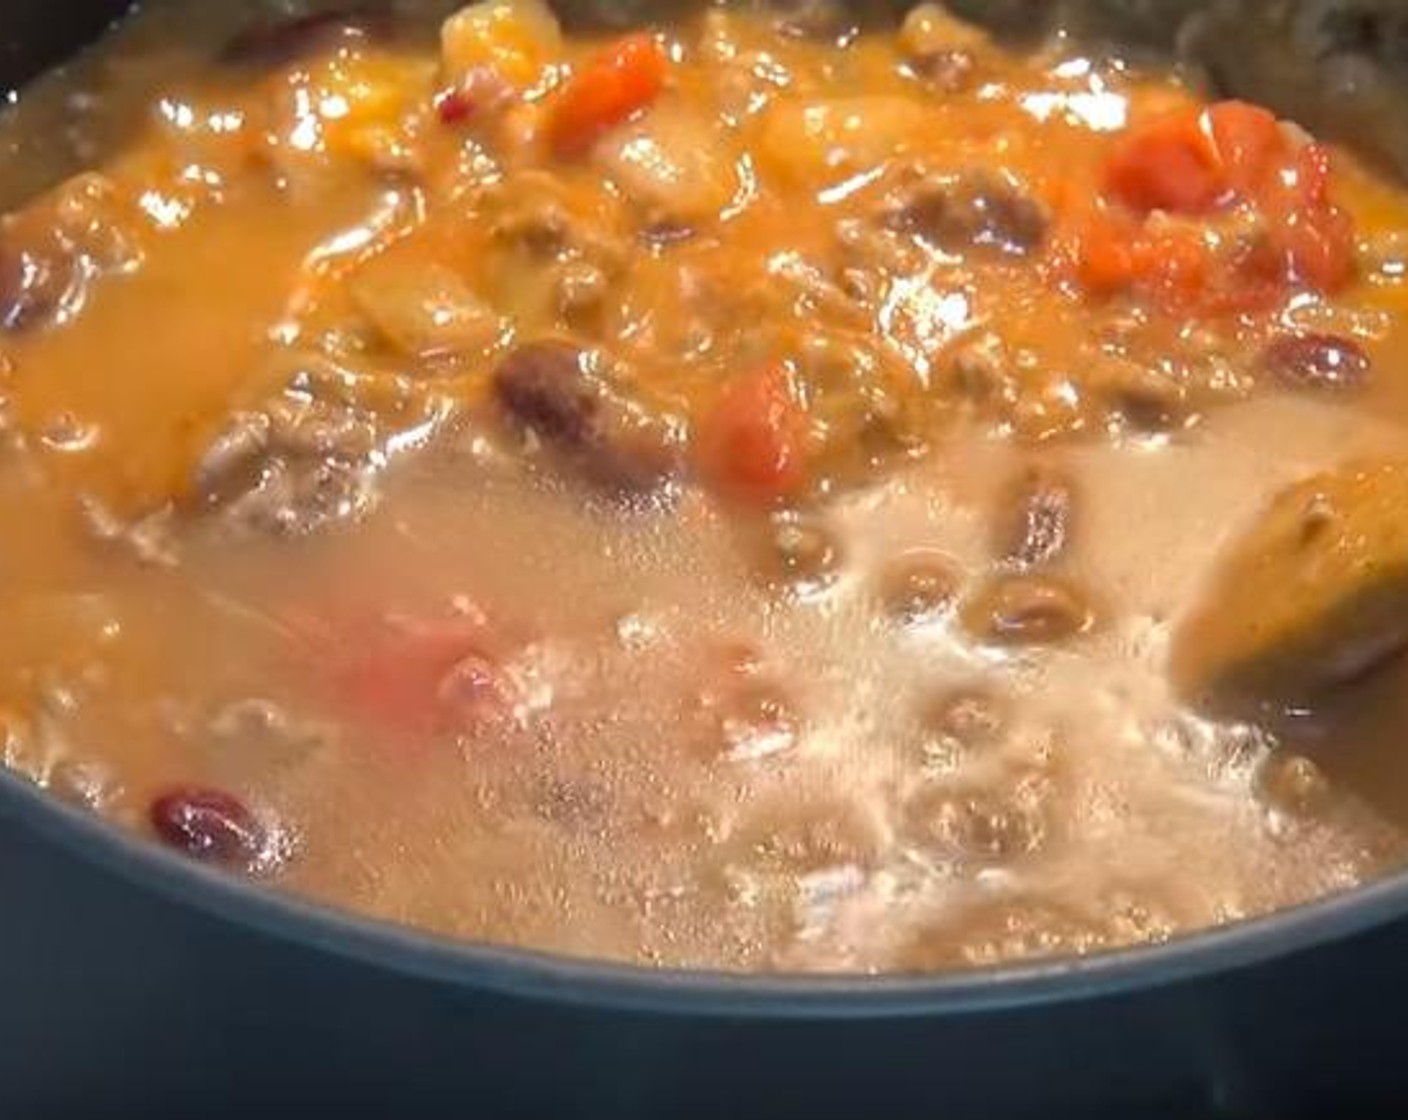 step 3 Add Canned Diced Tomatoes (1 3/4 cups), Red Kidney Beans (2 1/2 cups), McCormick® Taco Seasoning Mix (1/4 cup), Cream of Chicken Soup (10.5 oz) and Water (1/2 cup). Mix together. Let simmer for 5-10 minutes, or until the mixture has thickened slightly.